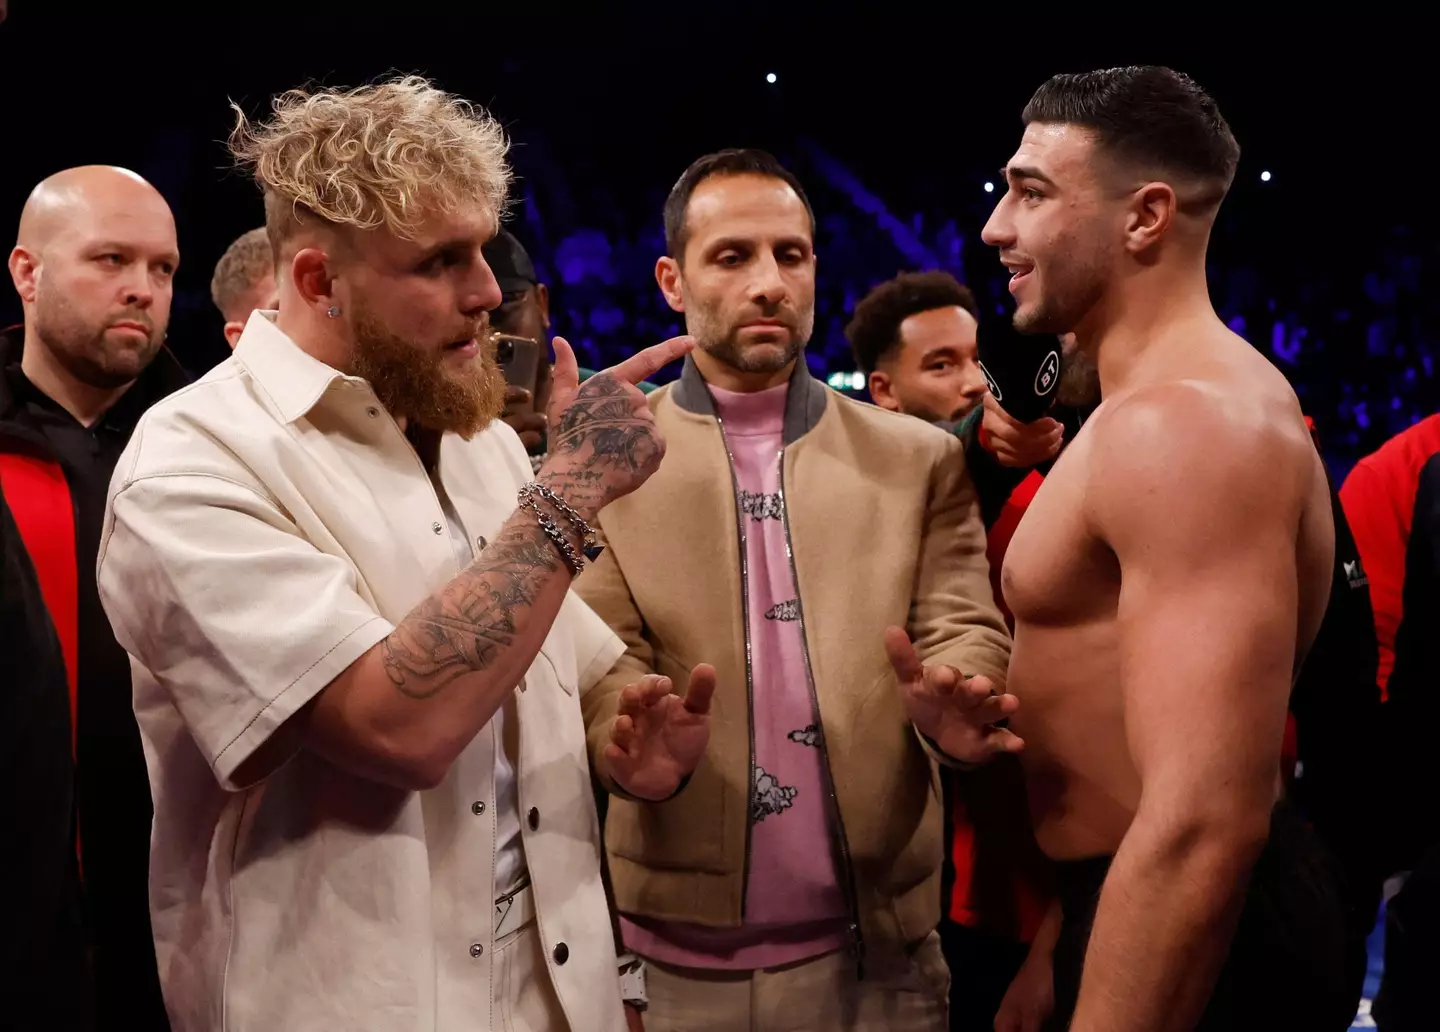 Jake Paul and Tommy Fury facing off before the fight between Artur Beterbiev and Anthony Yarde last month.